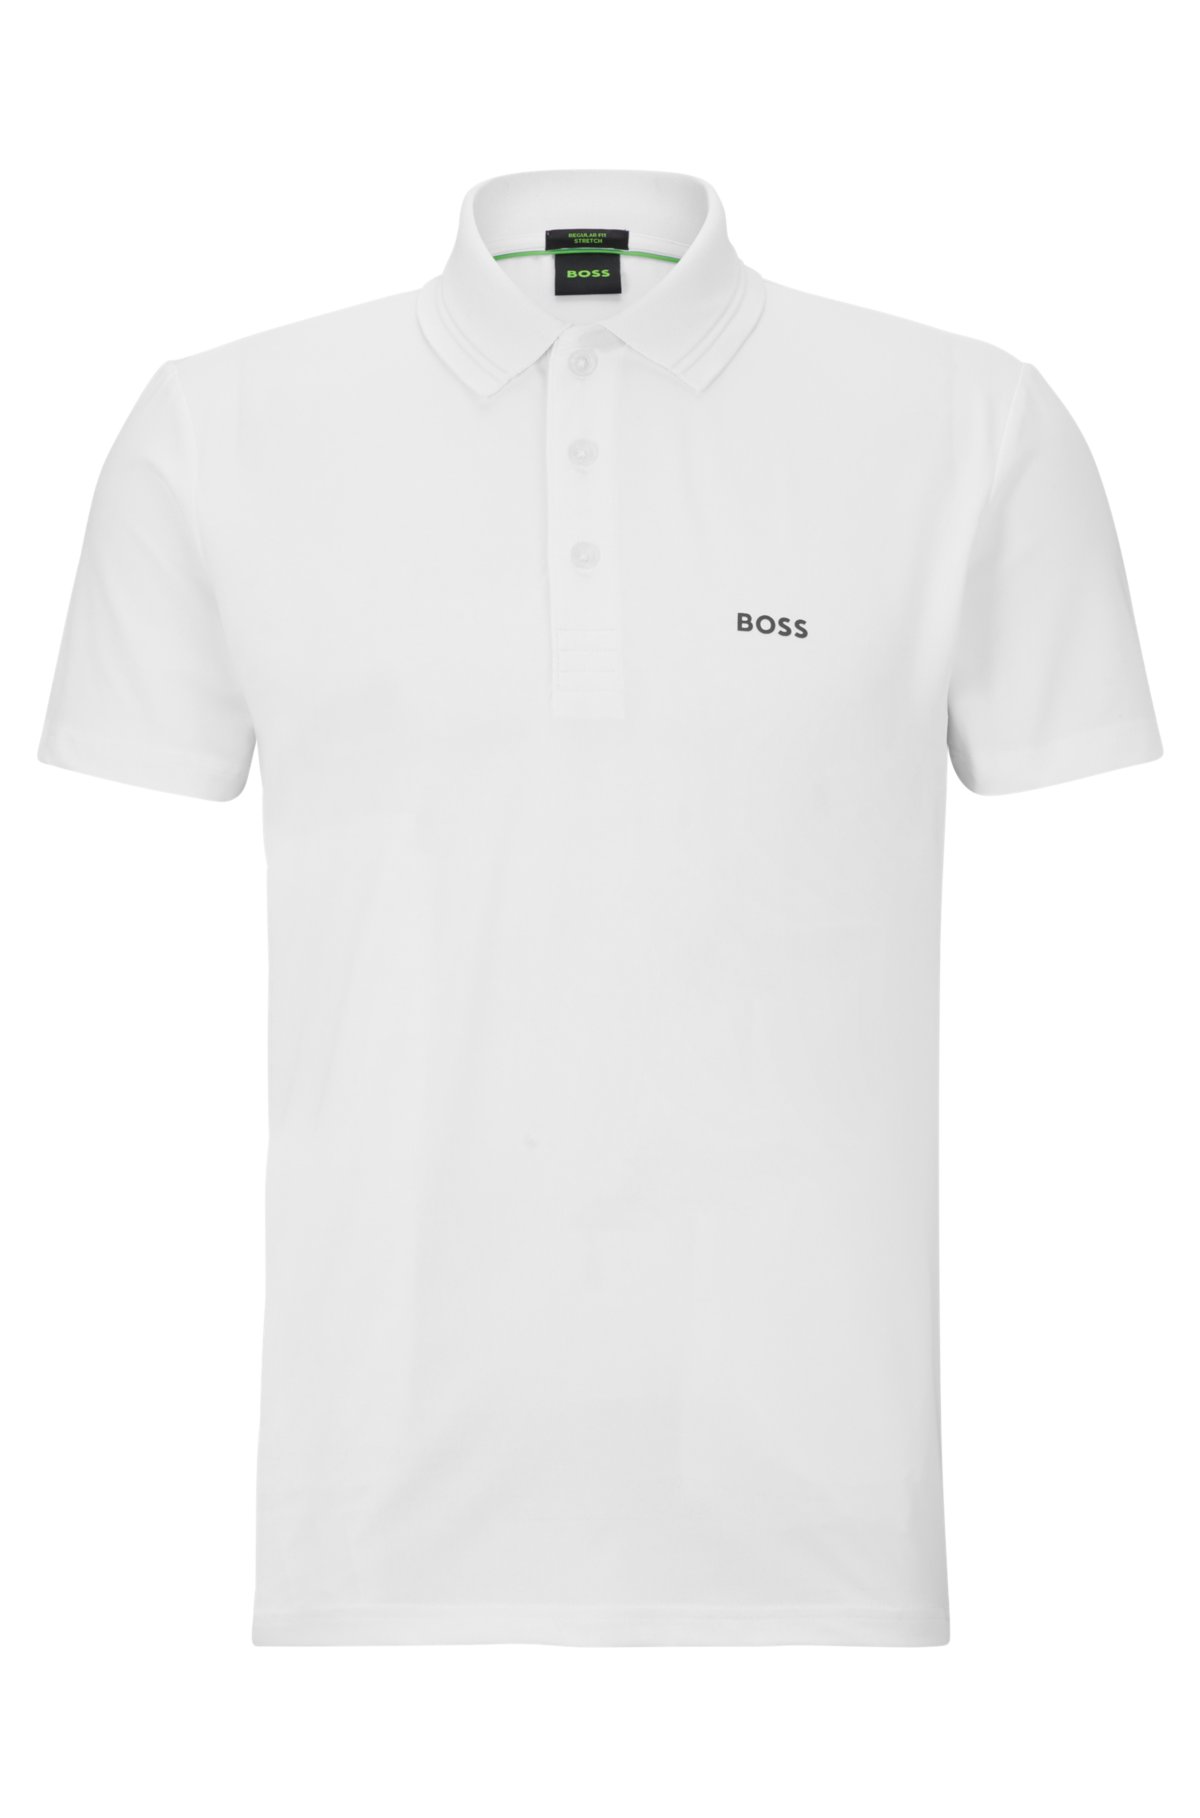 Lacoste L!ive Polo Shirt with Pocket in White for Men